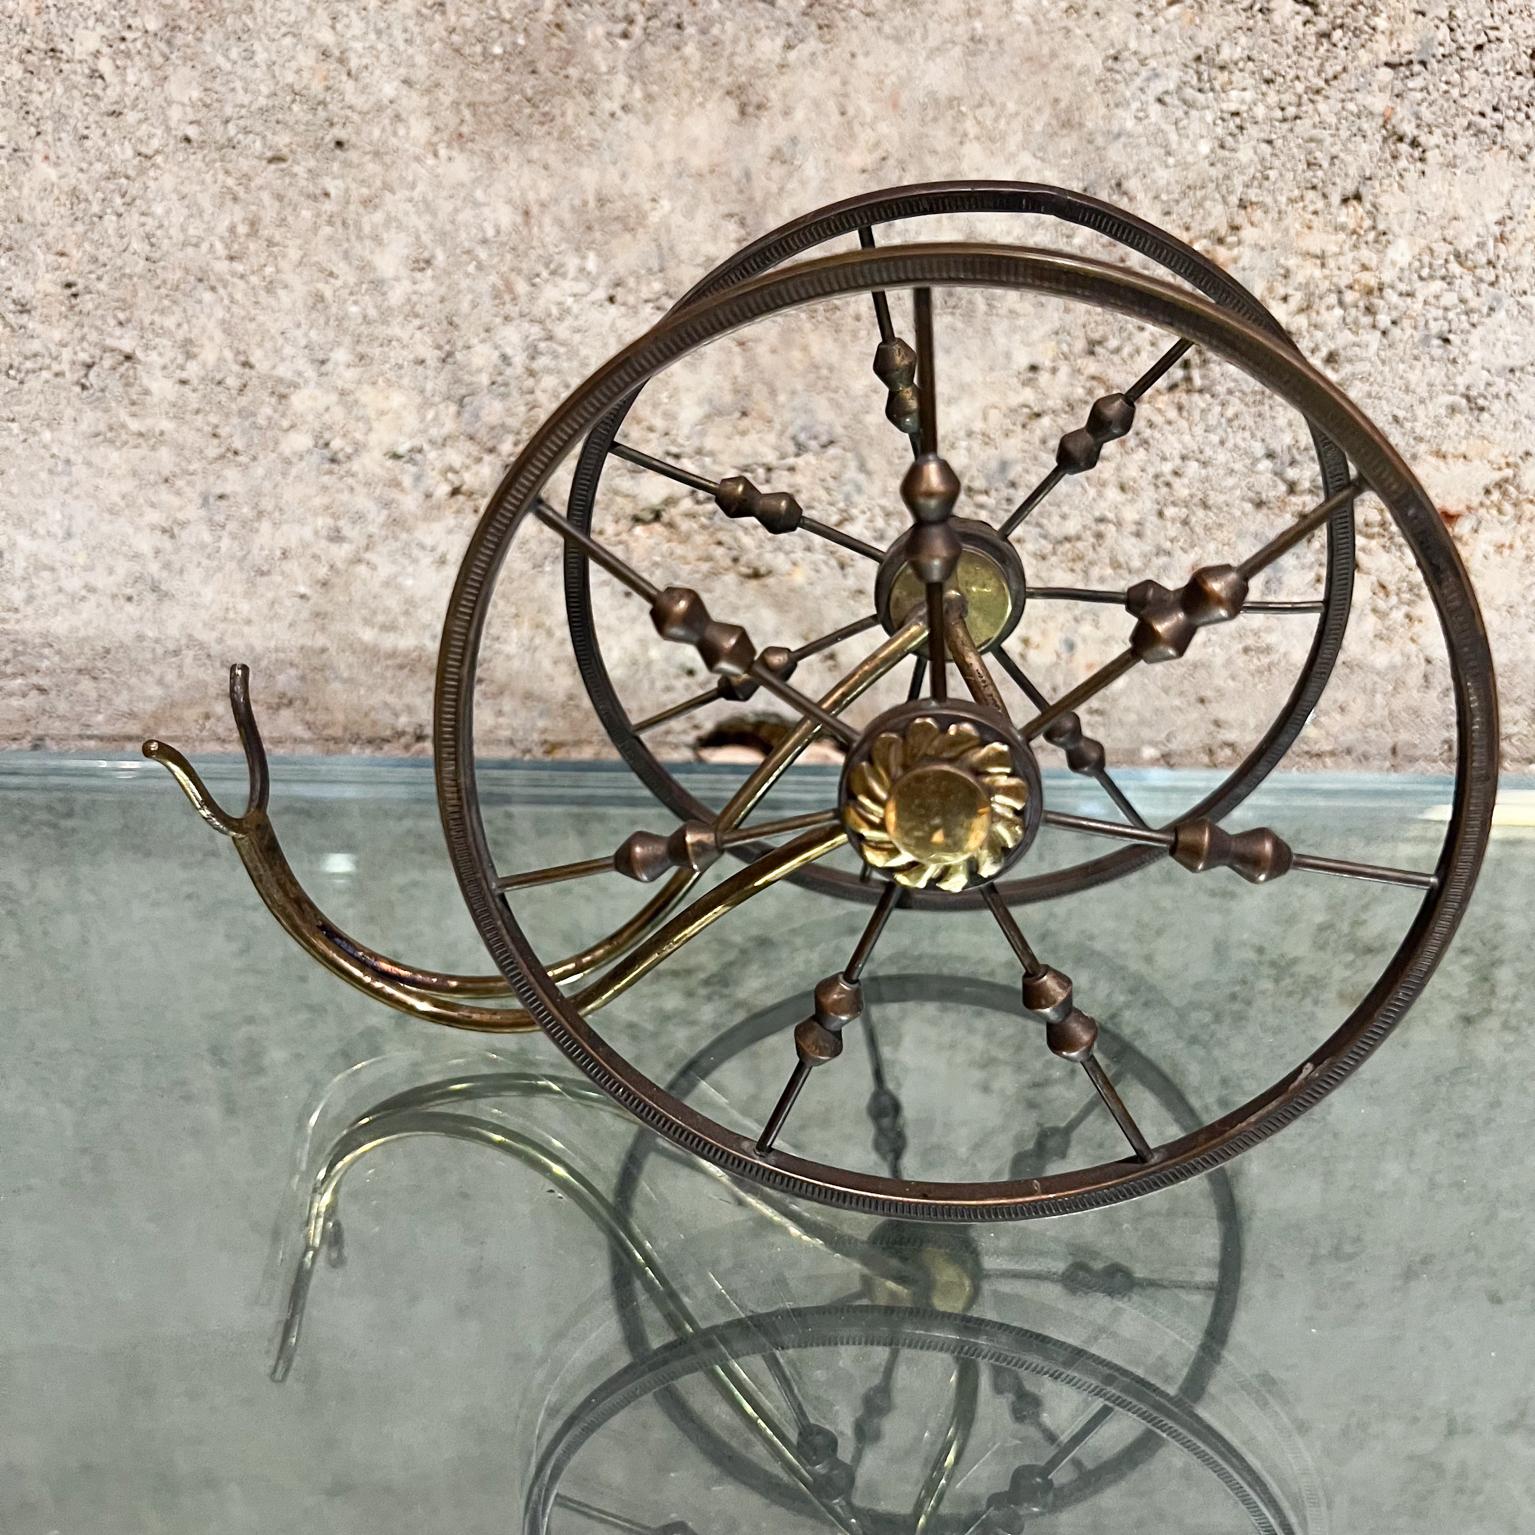 1950s Decorative Small Wine Bottle Holder Cradle Spoke Wheel in Sculptural Brass from Italy circa 1950s
5.25 tall x 3.5 w x 7.25 inches
All patinated brass. Stamped MADE in ITALY.
Original Unrestored preowned vintage condition. Patina